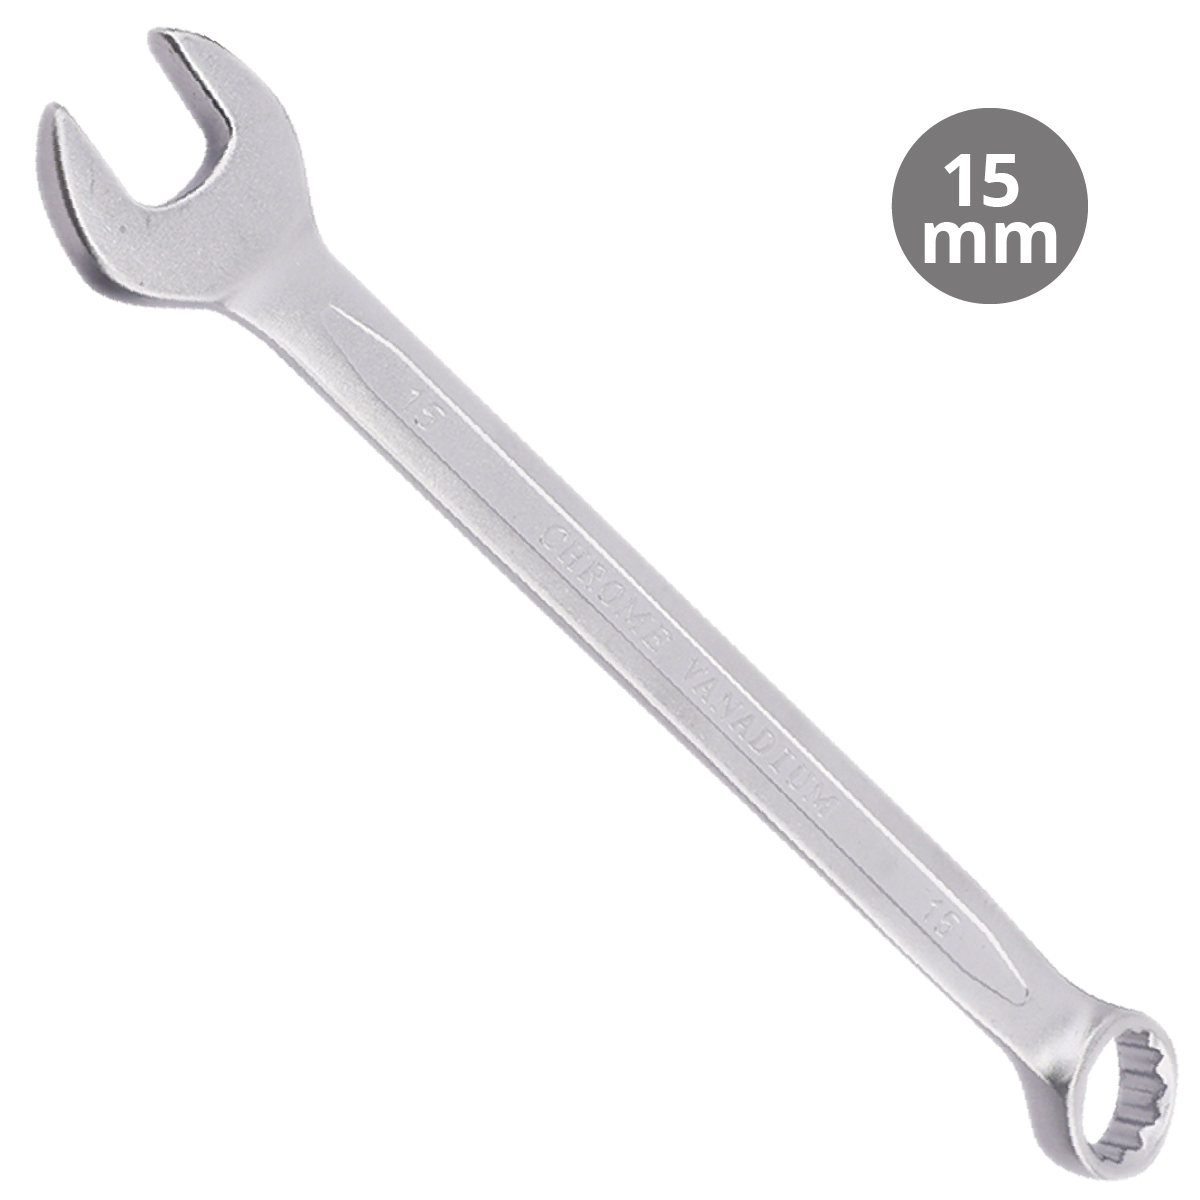 Combination wrench CR-V 15mm